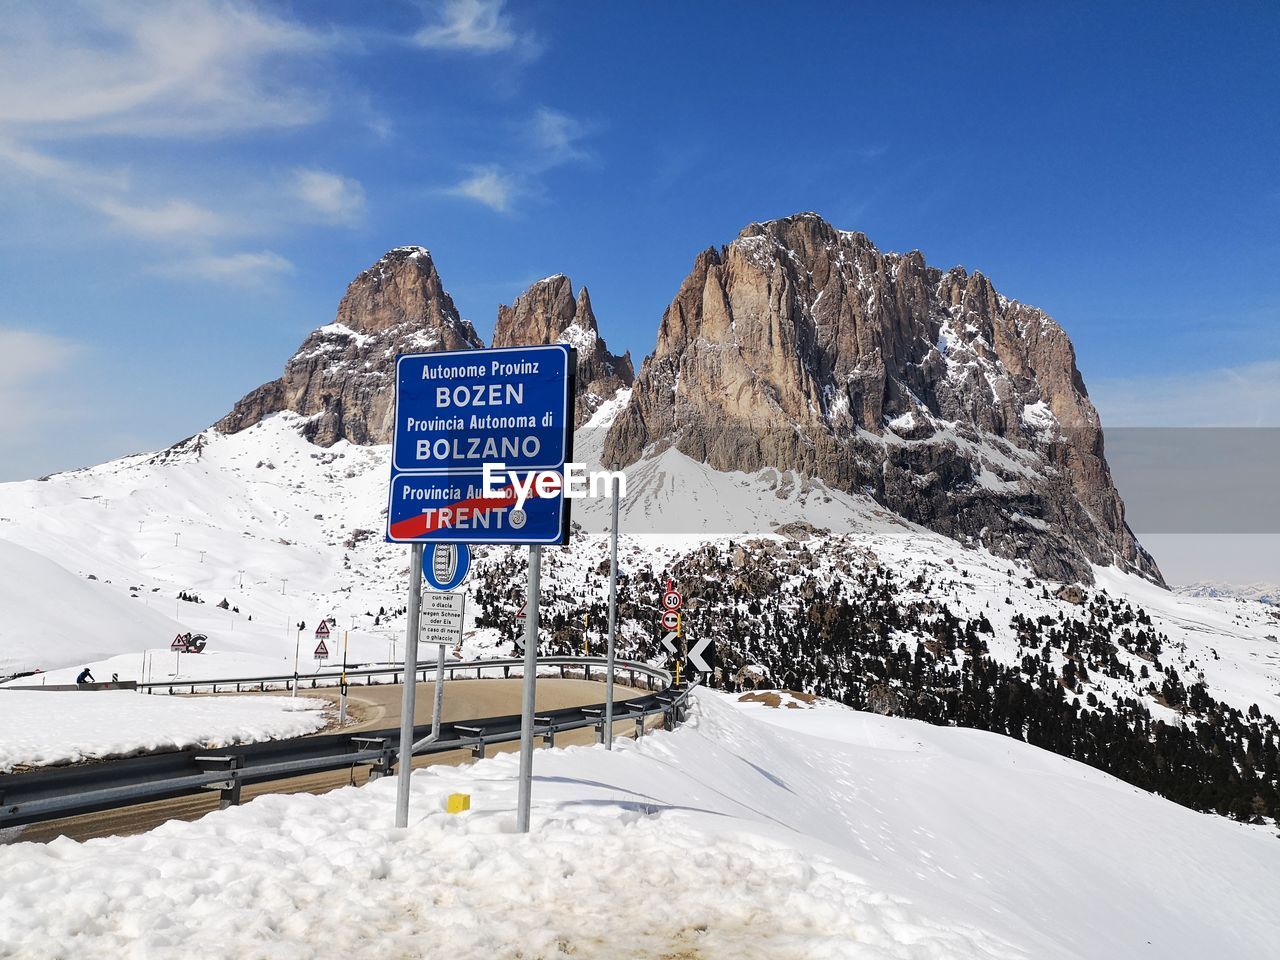 INFORMATION SIGN ON SNOW COVERED MOUNTAIN AGAINST SKY